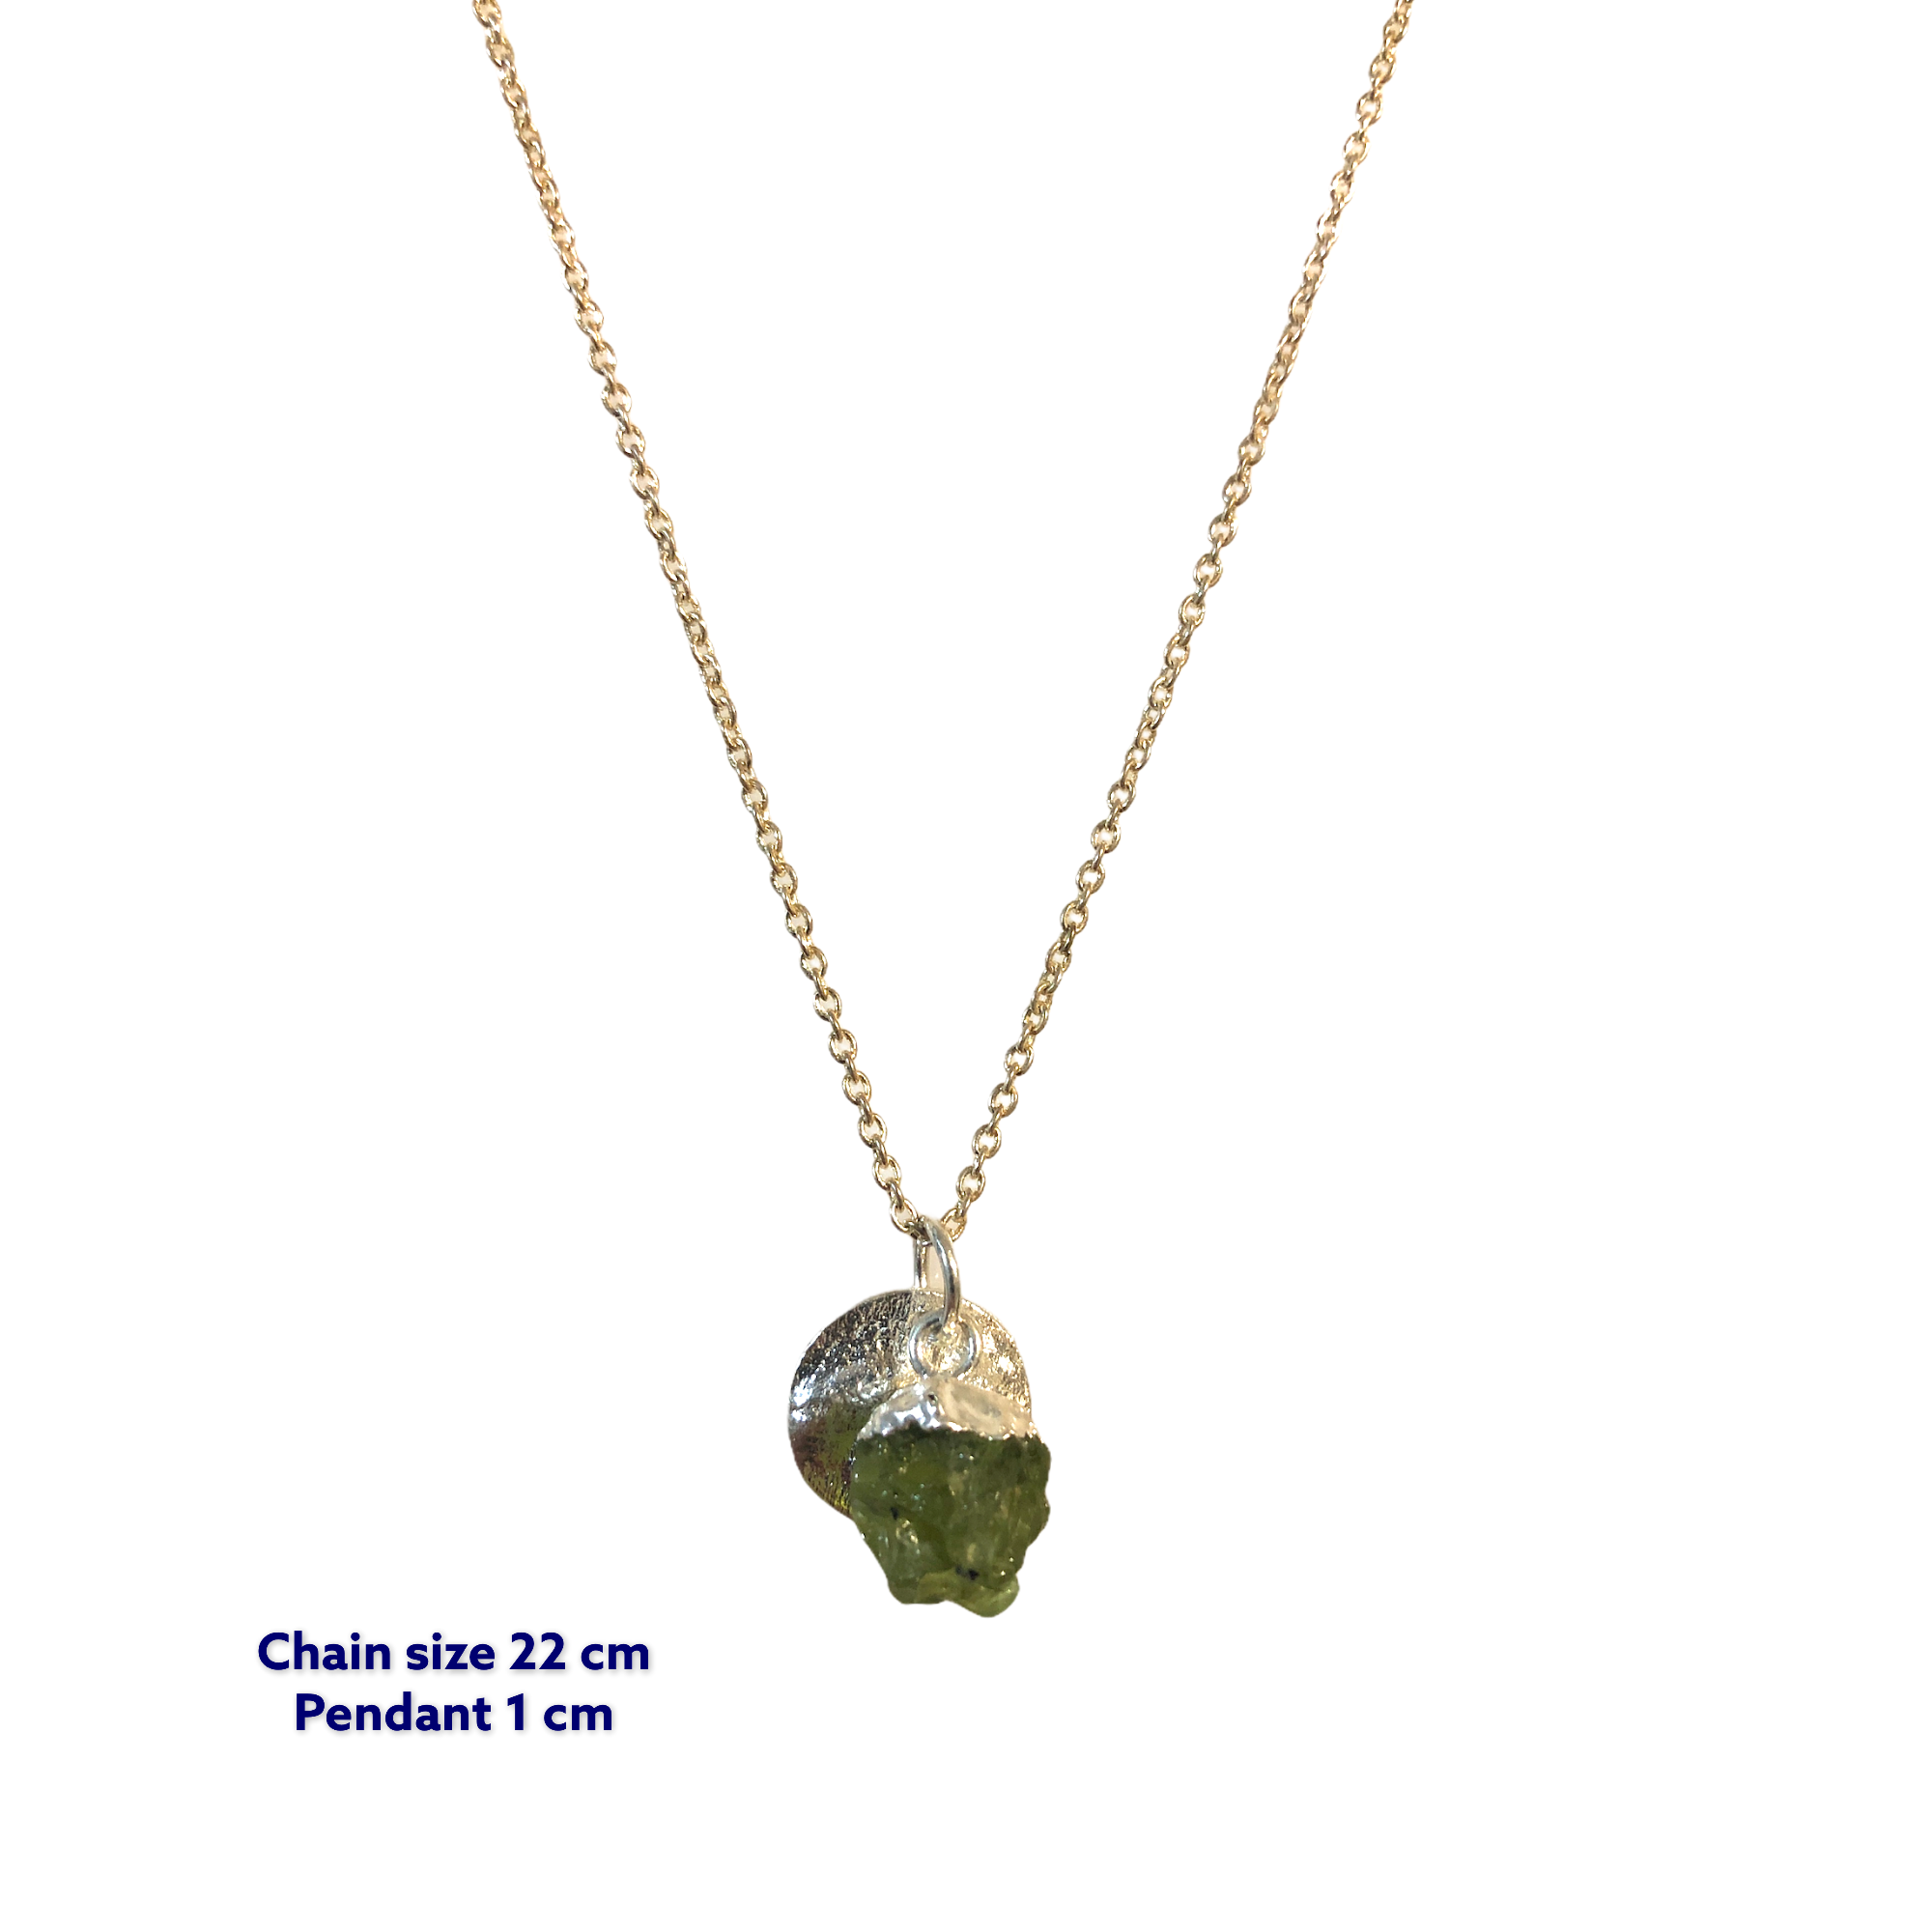 Raw Peridot Pendant - set in 925 sterling silver. | Accesorios